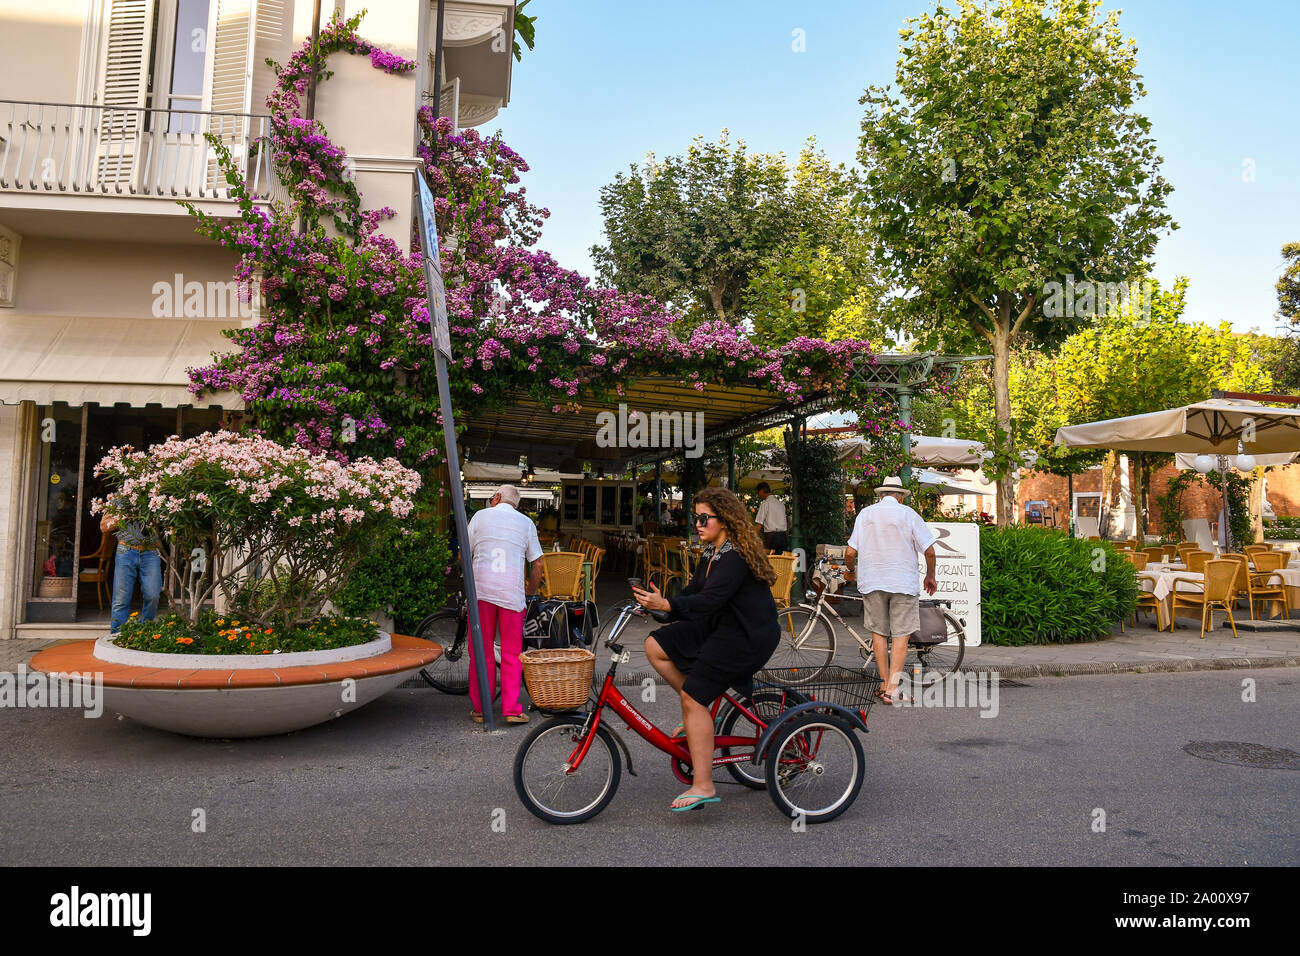 Street view of Forte dei Marmi with a woman on a three wheel bicycle and flowering plants of bougainvillea and oleander, Lucca, Tuscany, Italy Stock Photo